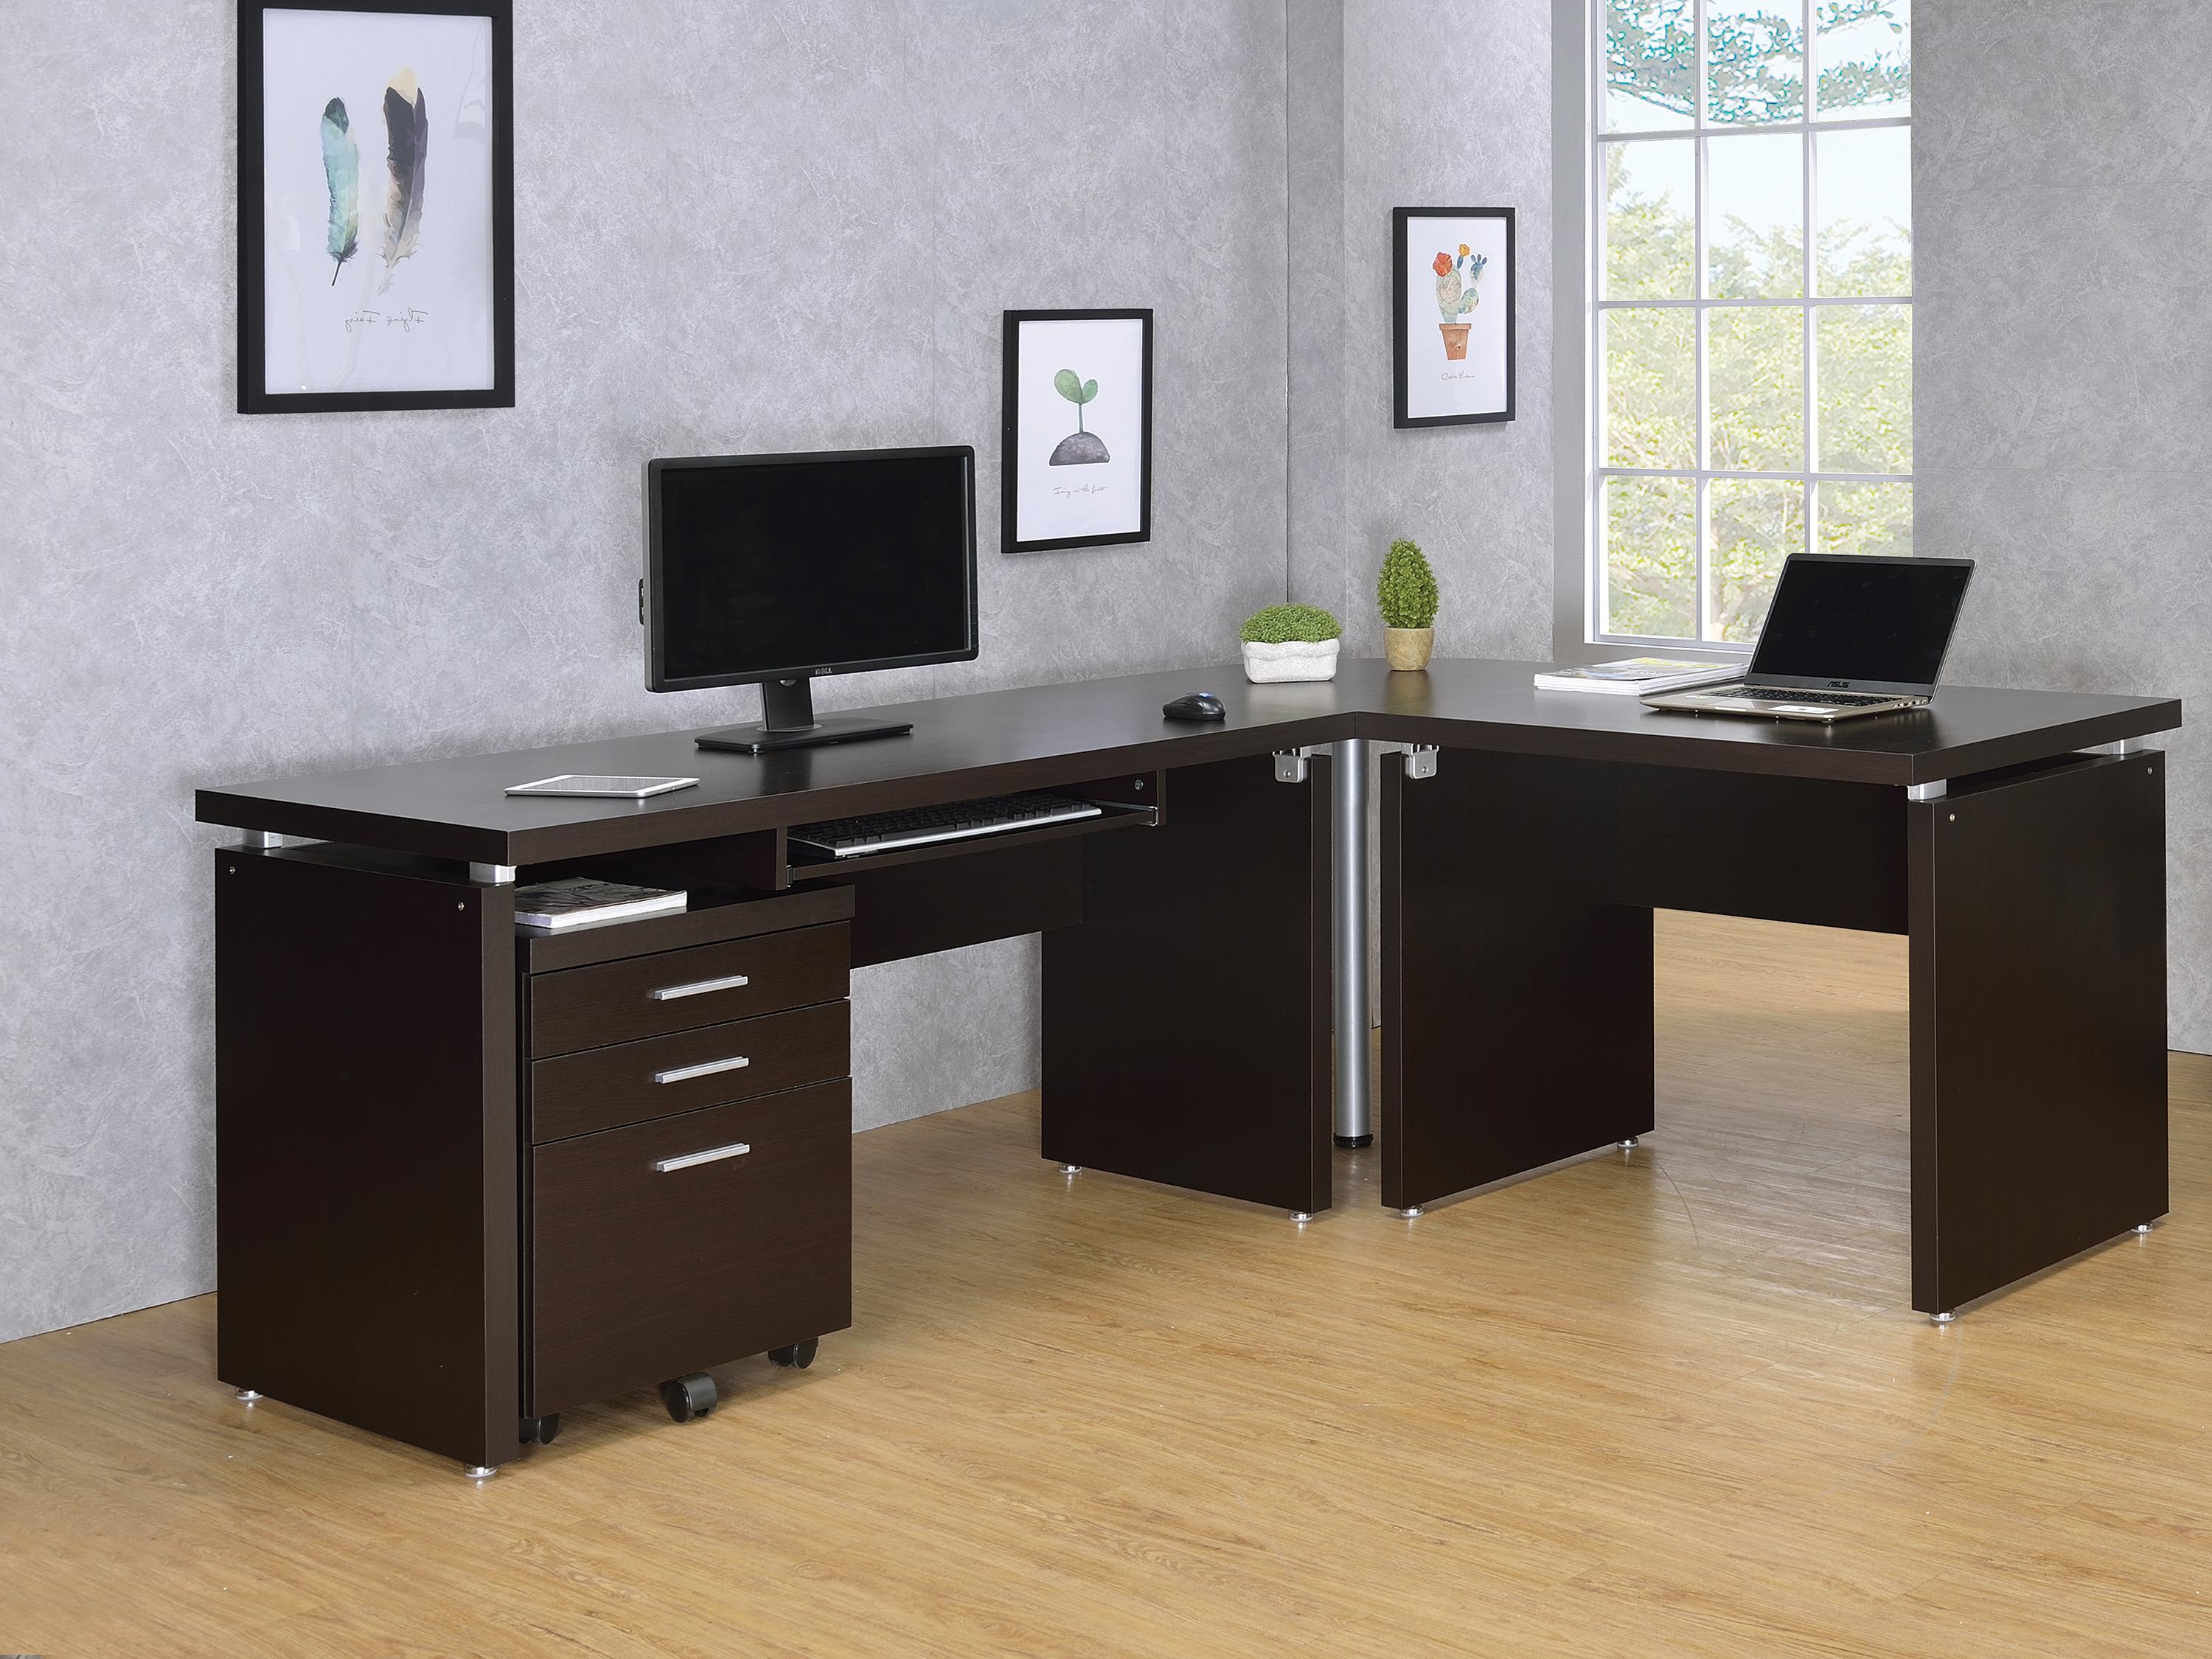 Transitional Computer Desk Set 800891-S2 Skylar 800891-S2 in Cappuccino 